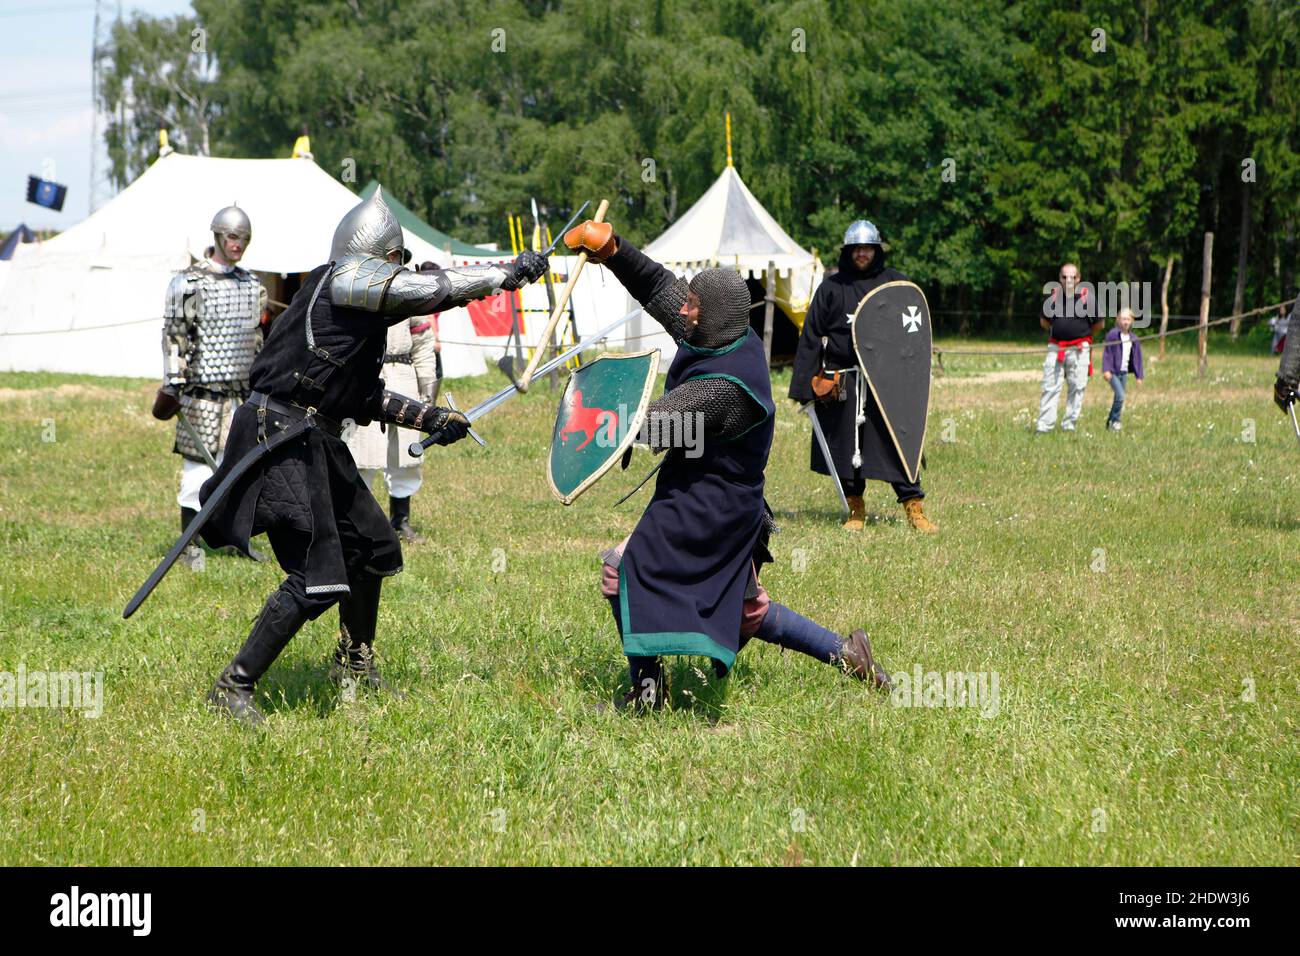 knight, knight games, knights, knight game Stock Photo